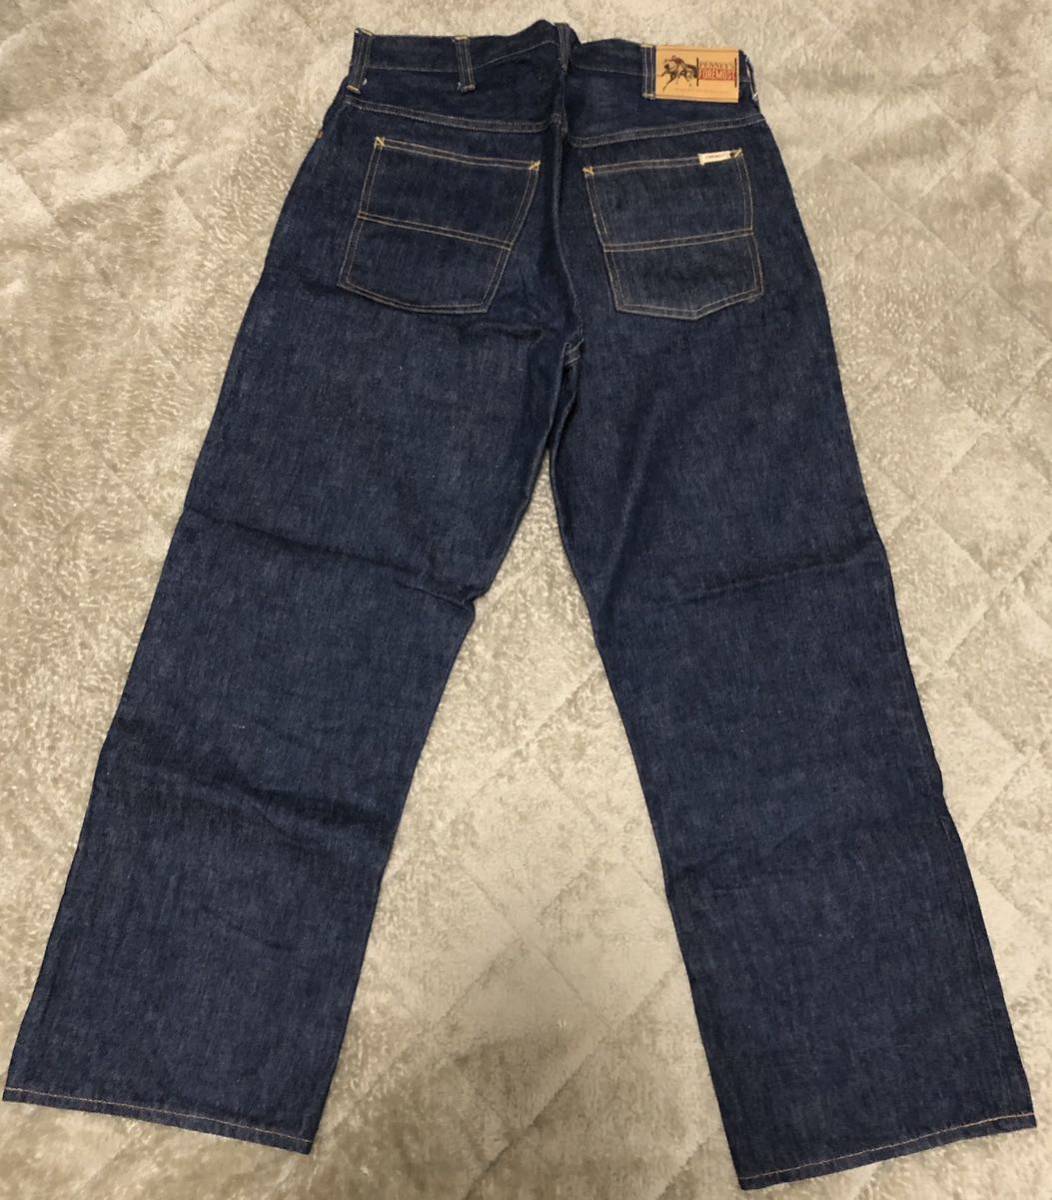 50's 濃紺PENNY'S FOREMOST 5POCKET JEANS W32/片耳！ペニーズ1WASH？の画像7